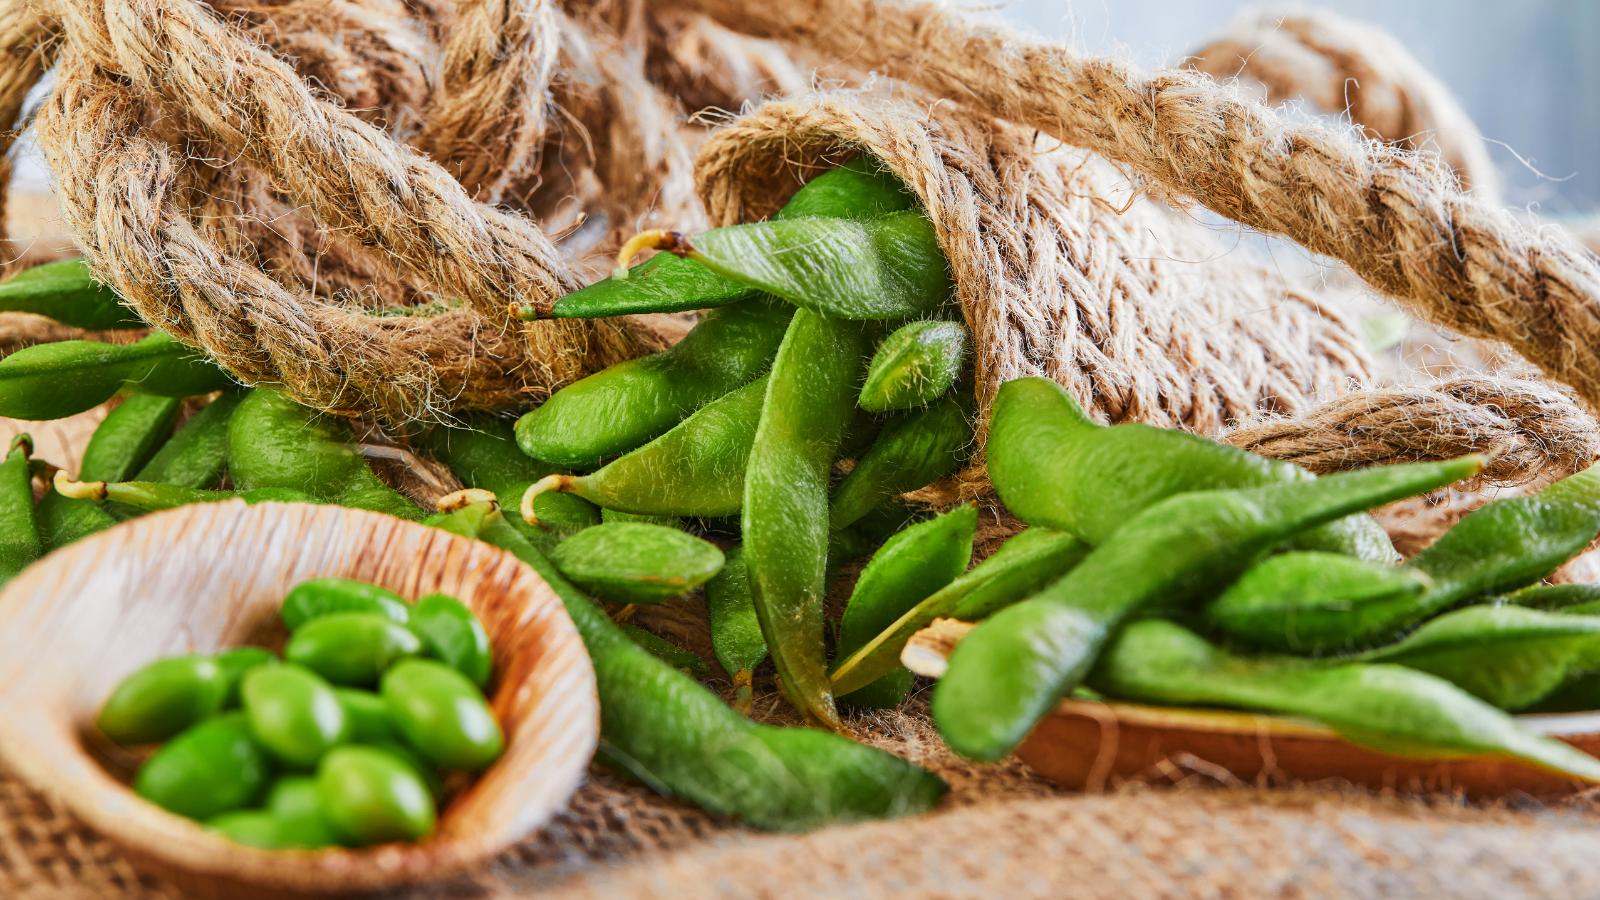 Edamame pods and beans.